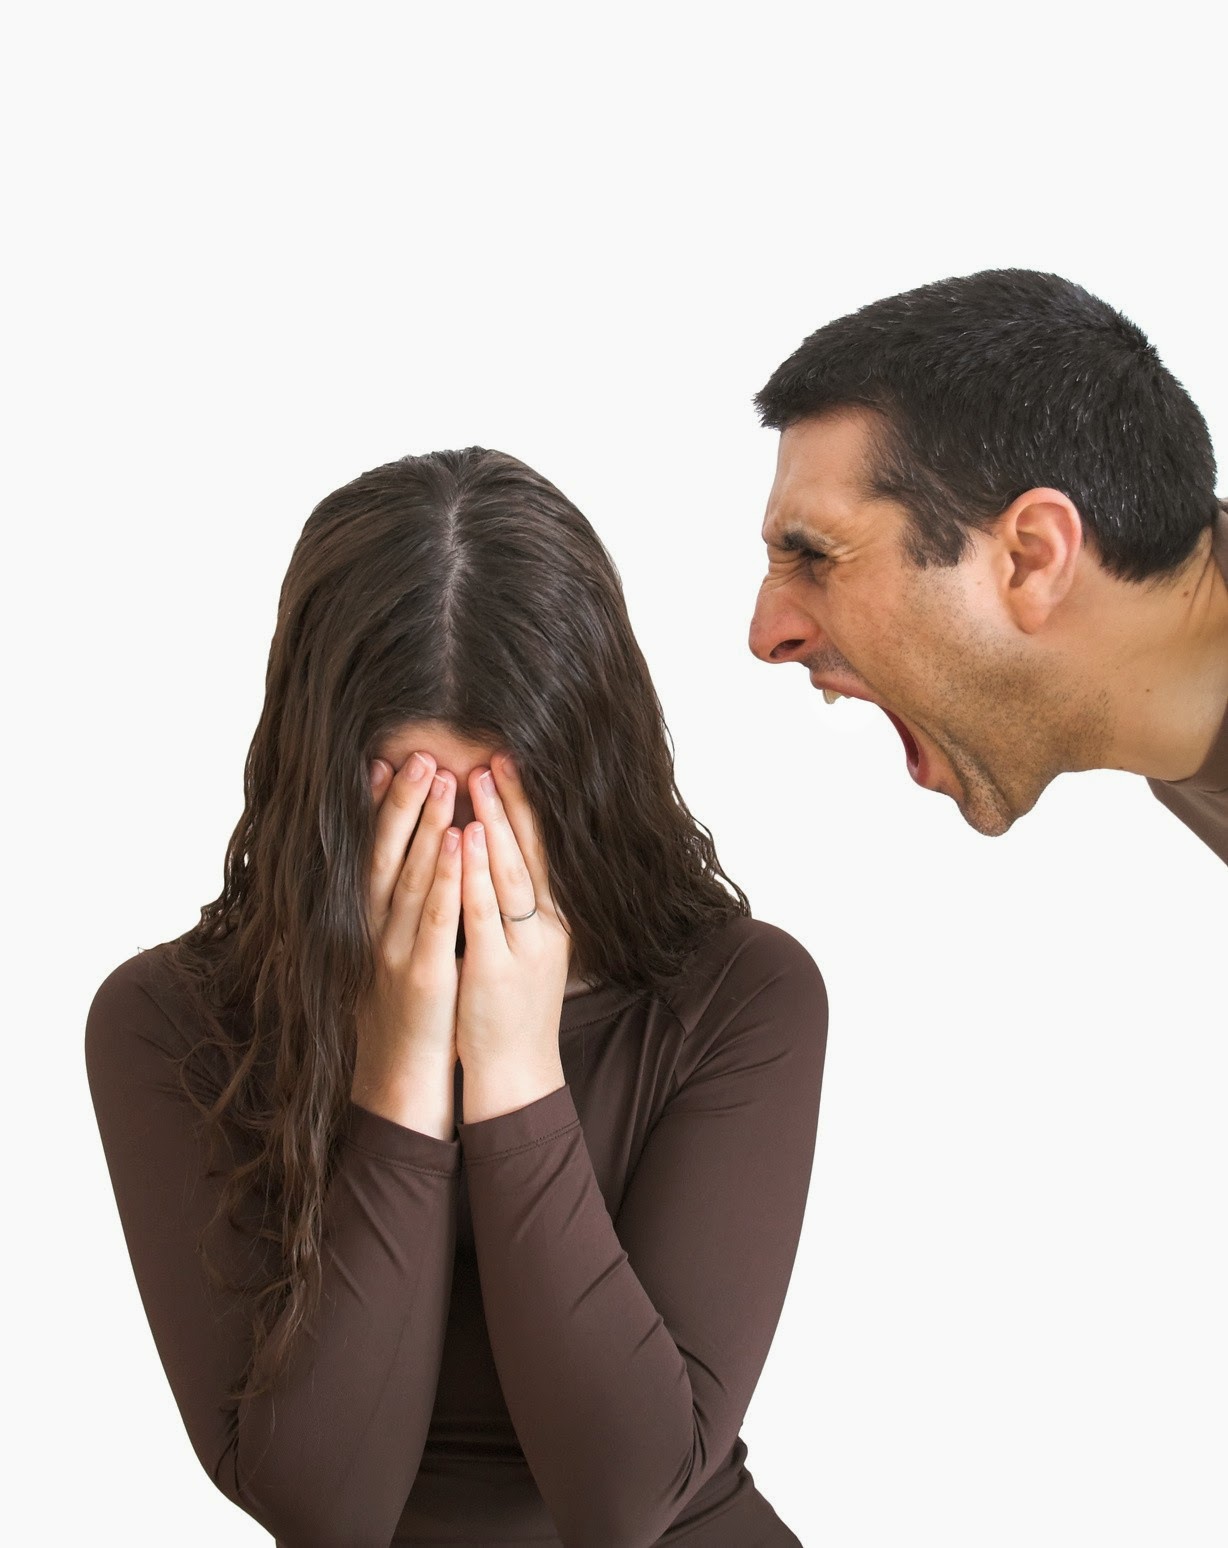 How to deal with a passive aggressive boyfriend: How to deal with a passive aggressive husband